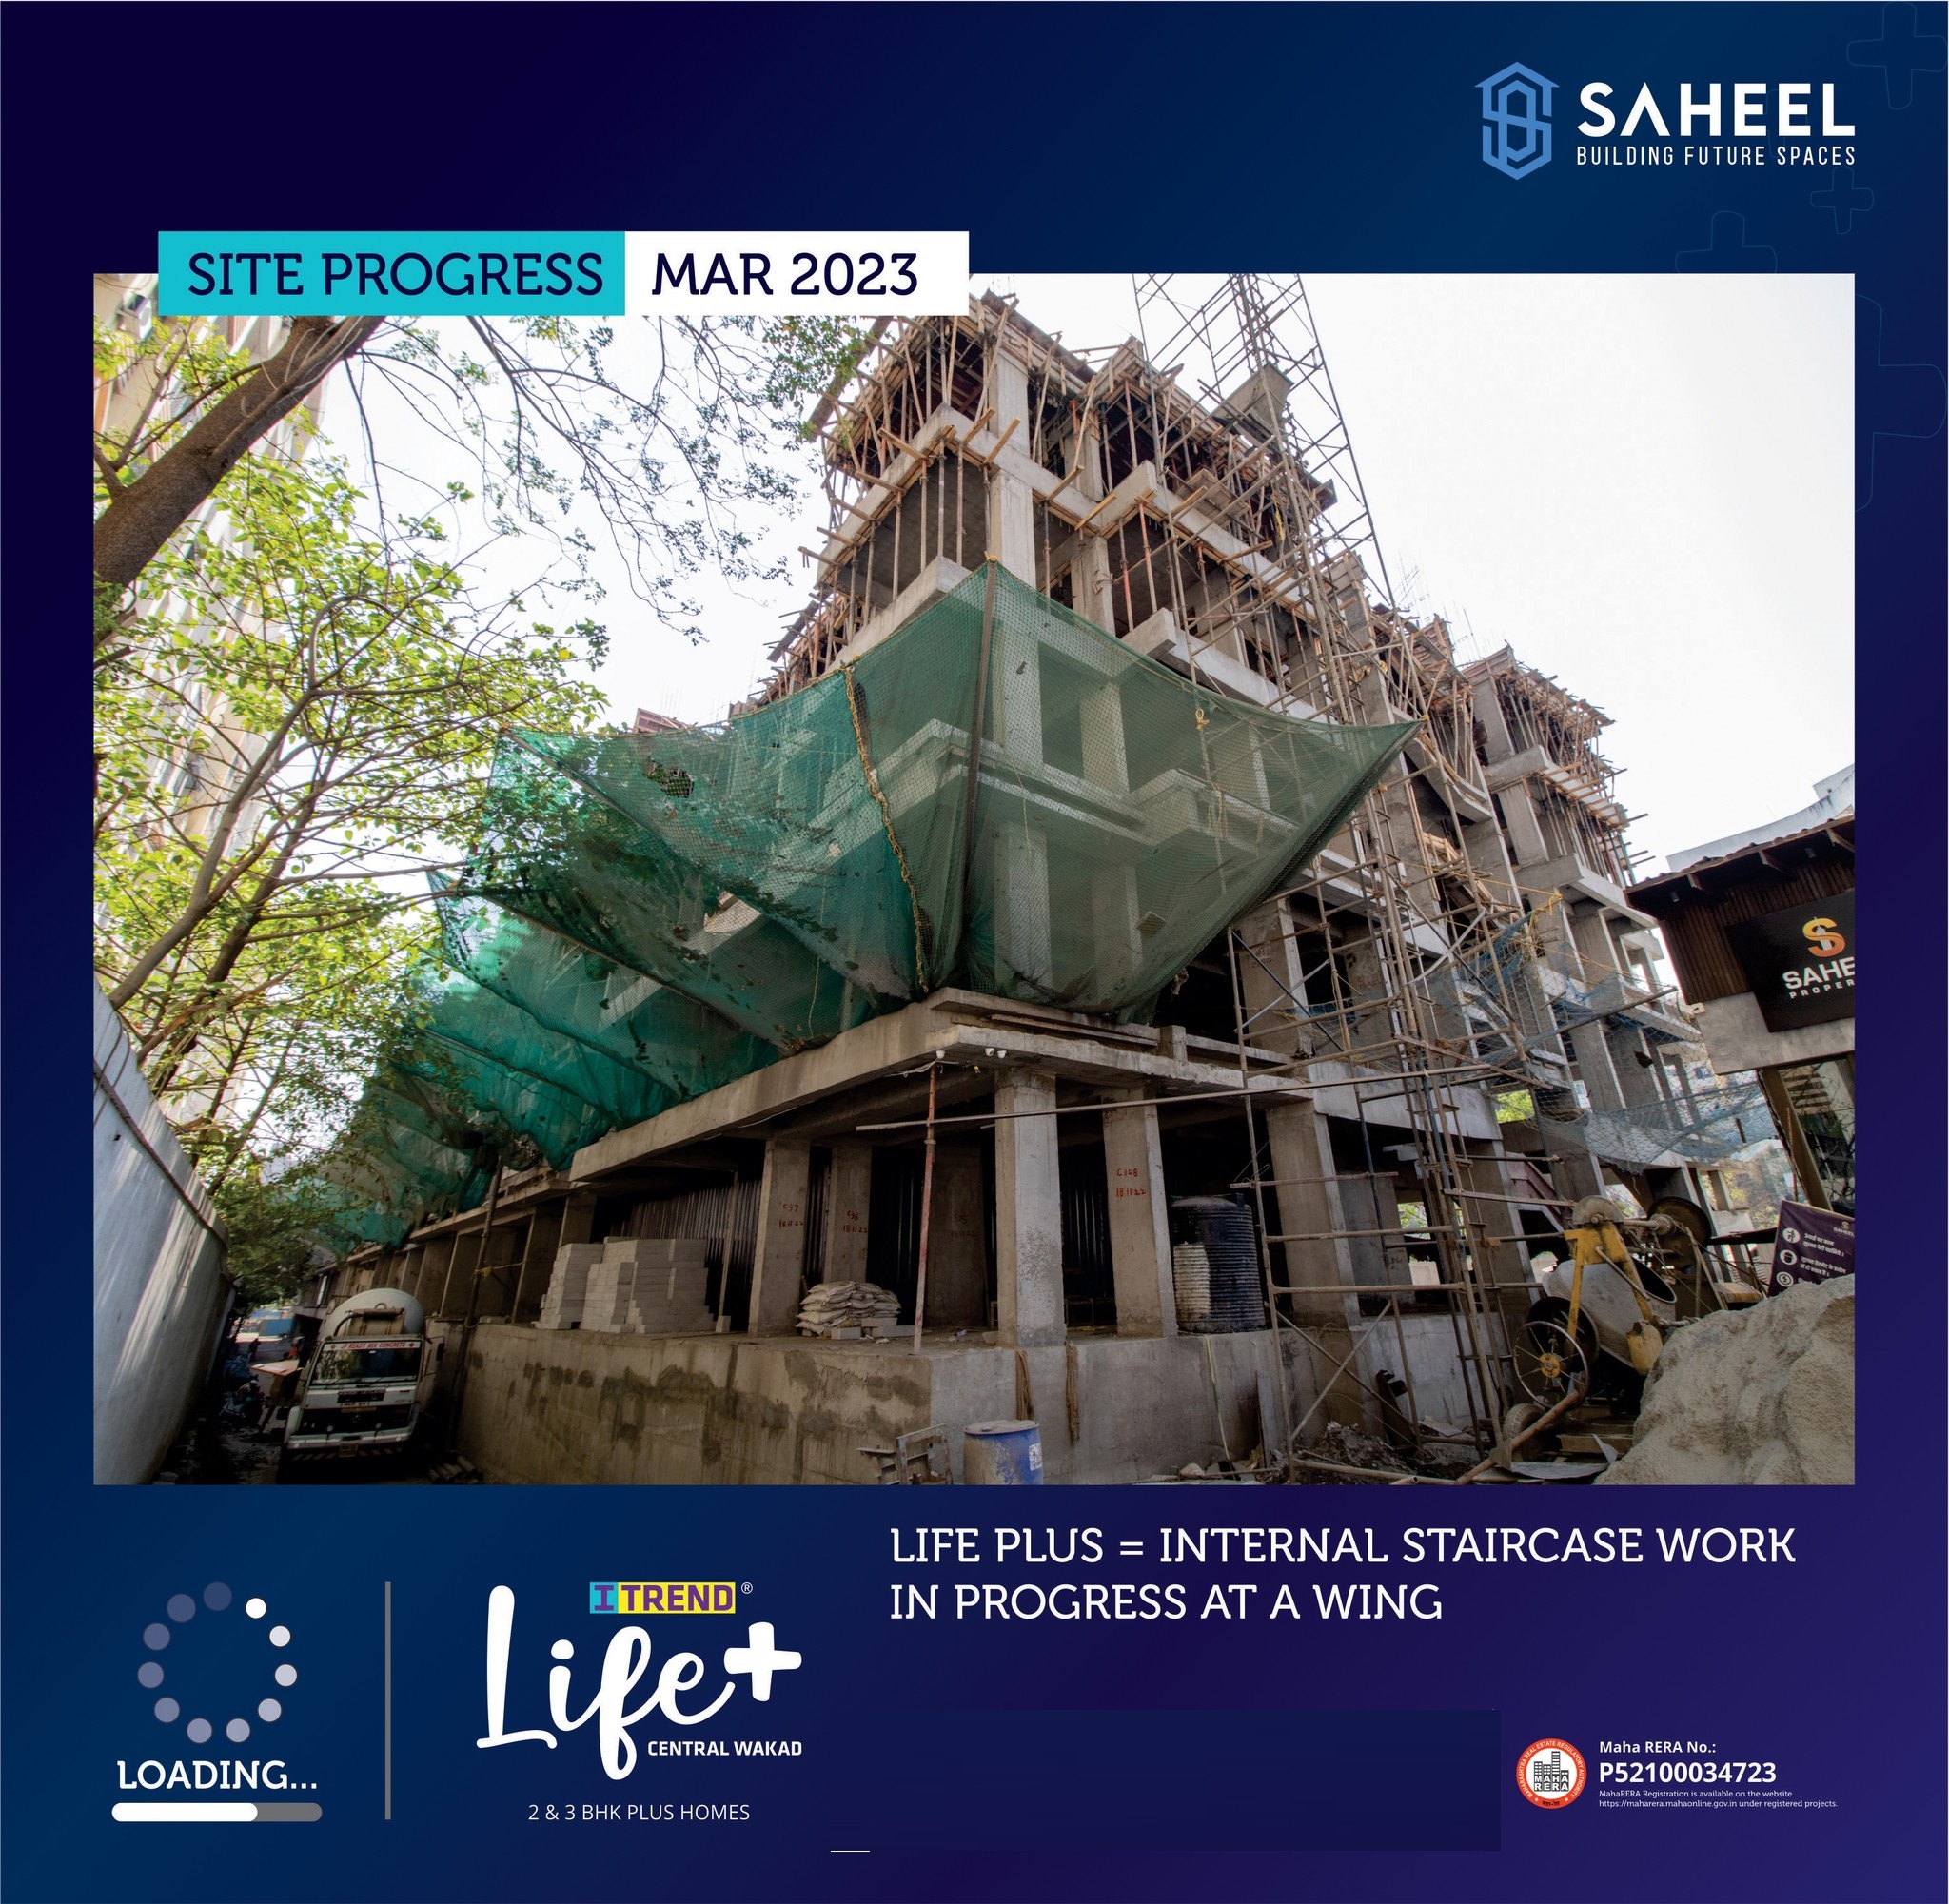 Site progress March 2023 at Saheel ITrend Life Plus in Wakad, Pune Update